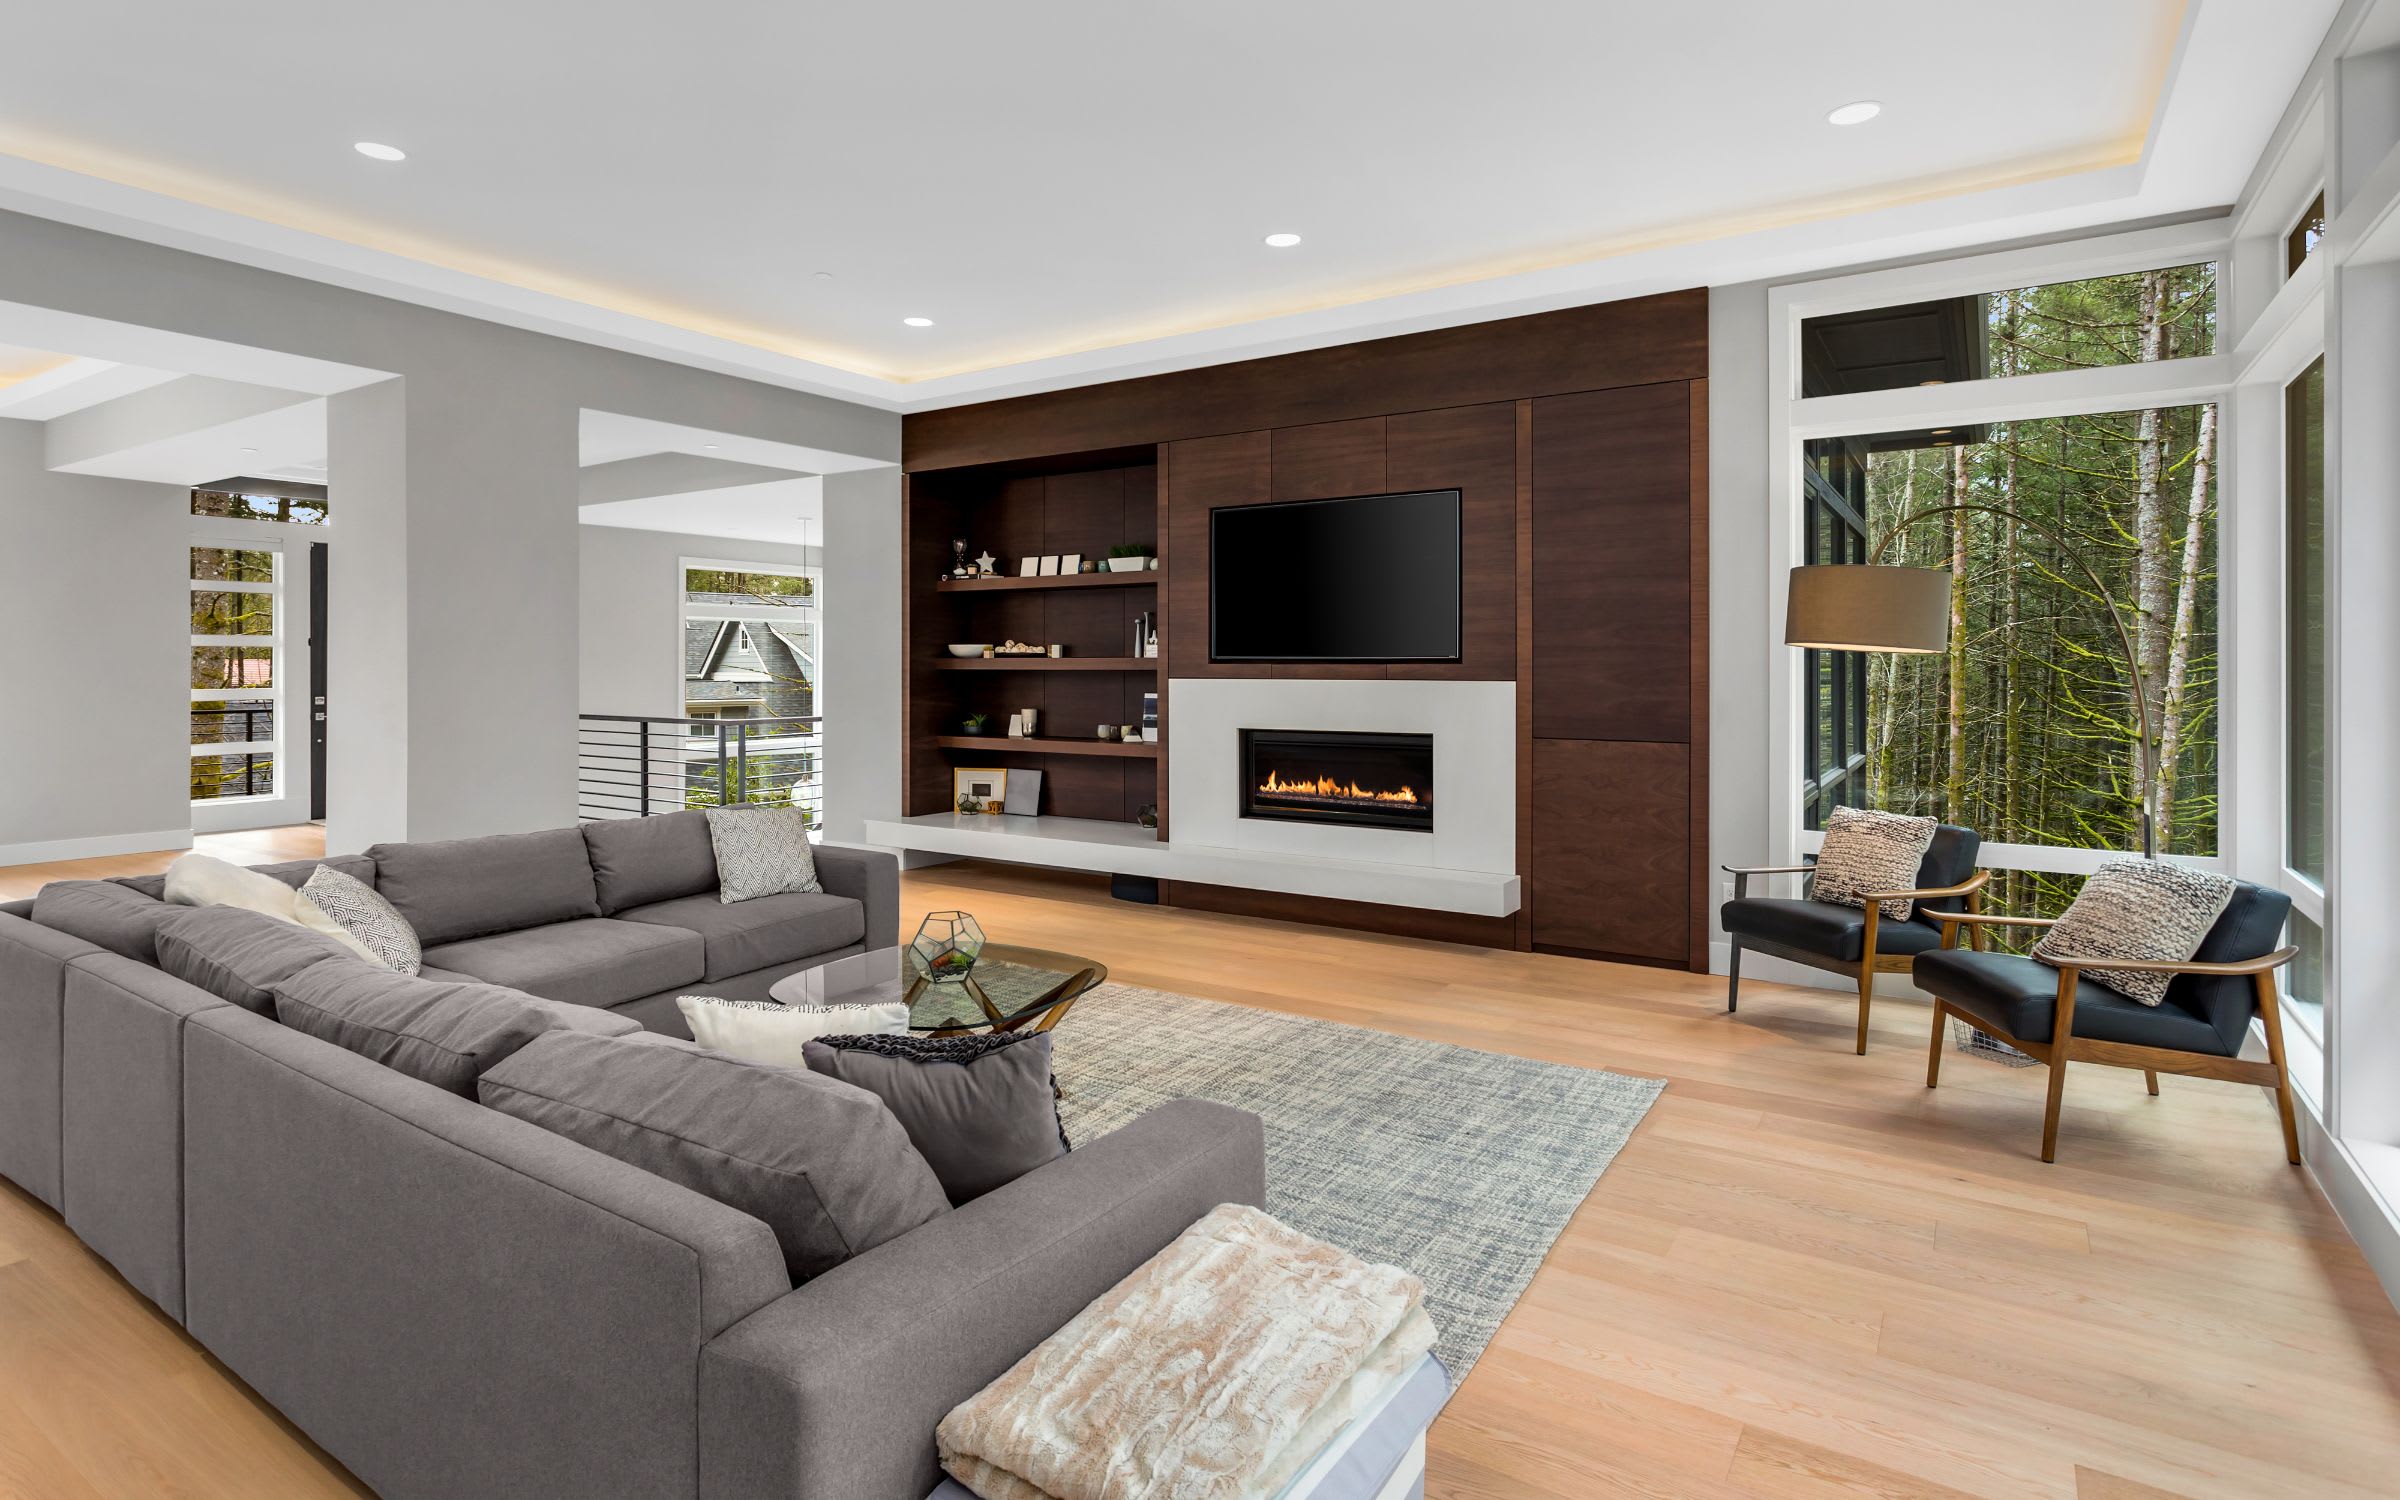 A cozy living room with a plush sectional sofa facing a fireplace and a flat-screen TV.